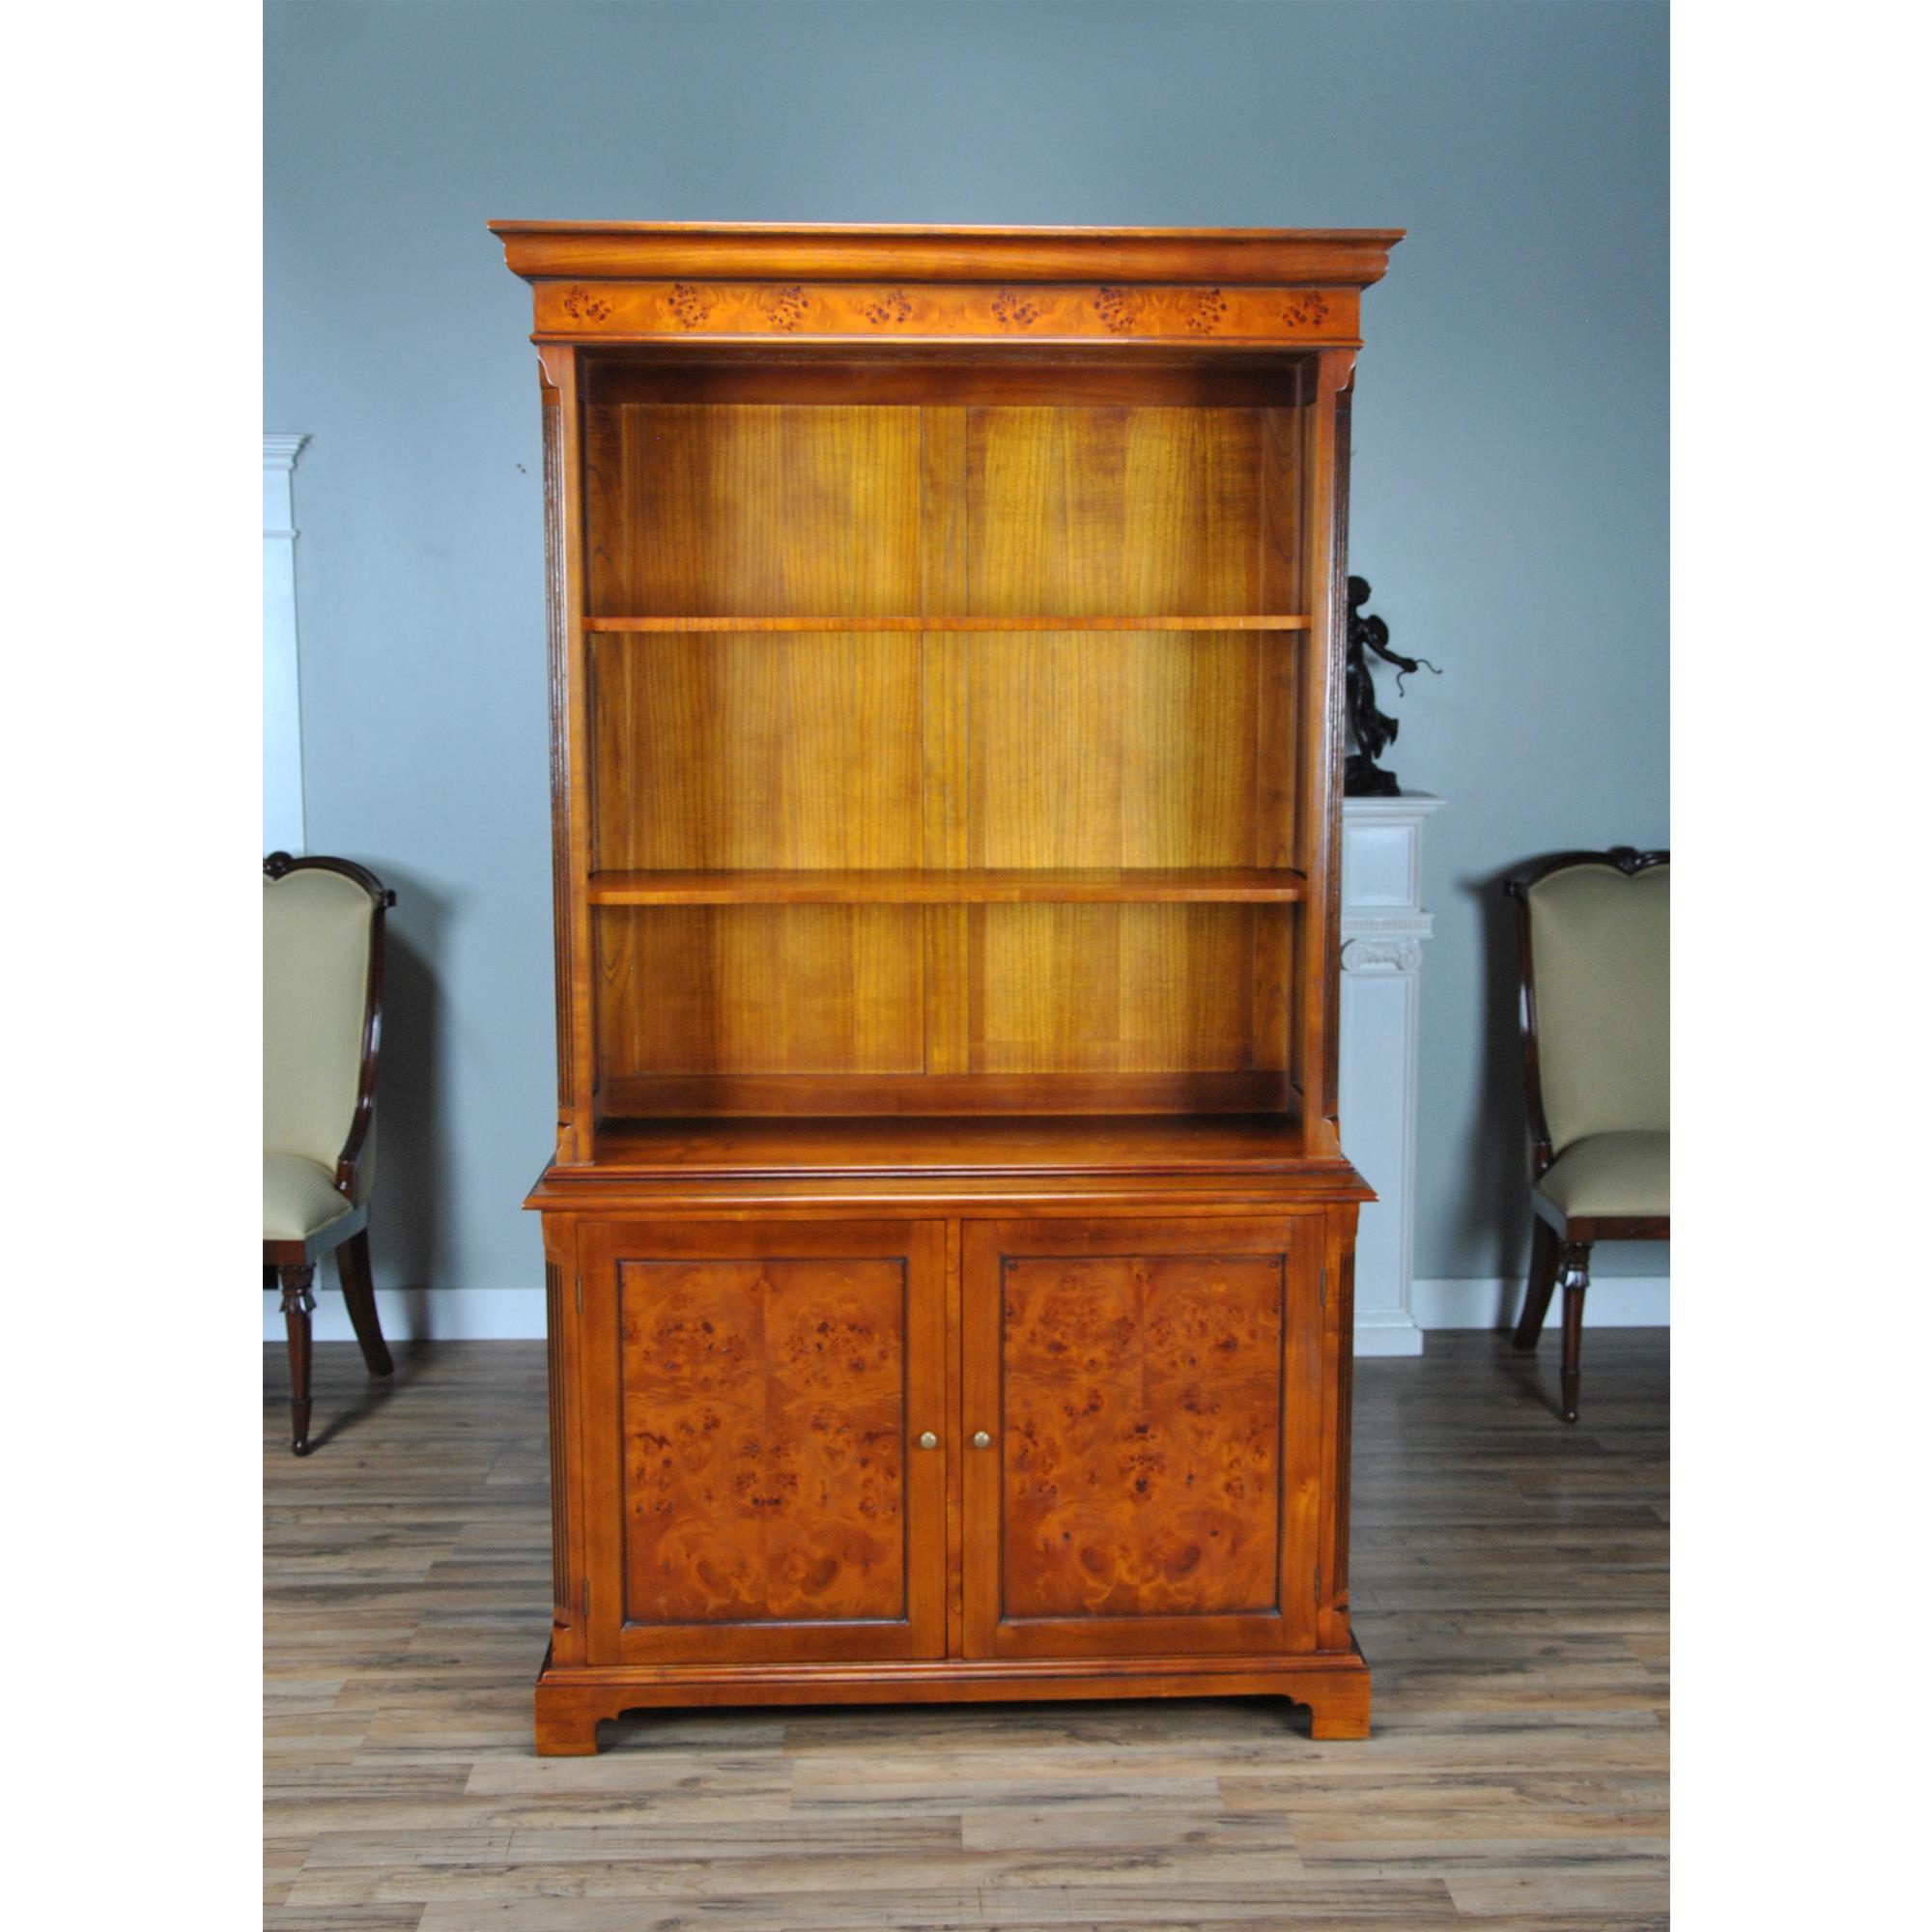 Our Country Estate Cupboard is manufactured in two sections, the upper section consisting of a deep, molded cornice with burled veneer following the shape of reeded corners rising from below, with lamb tongue detail at the top and bottom of the